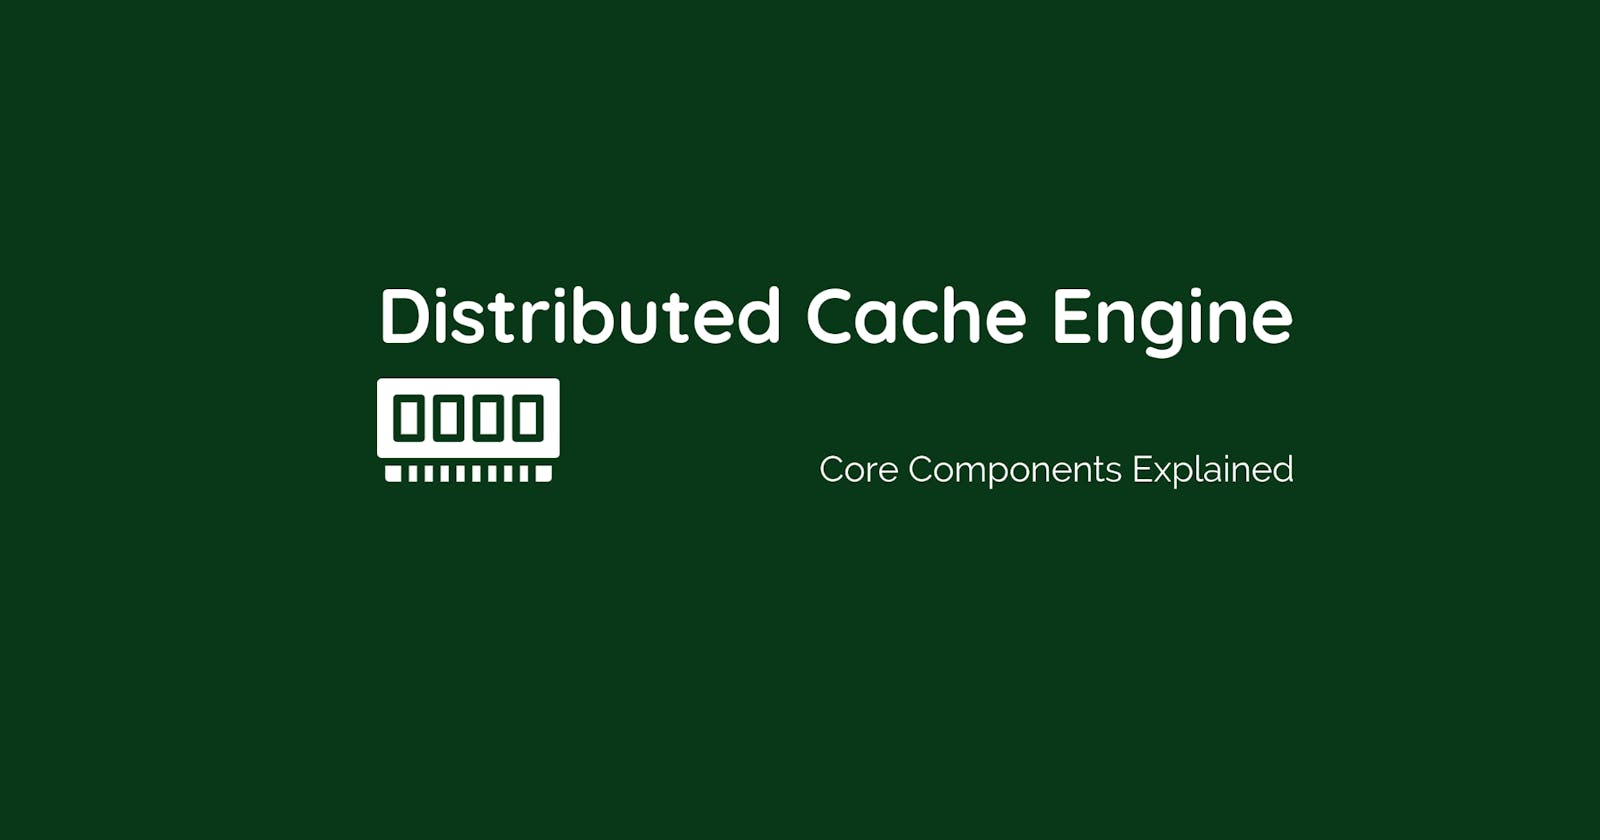 Deep Dive Inside a Distributed Cache Engine